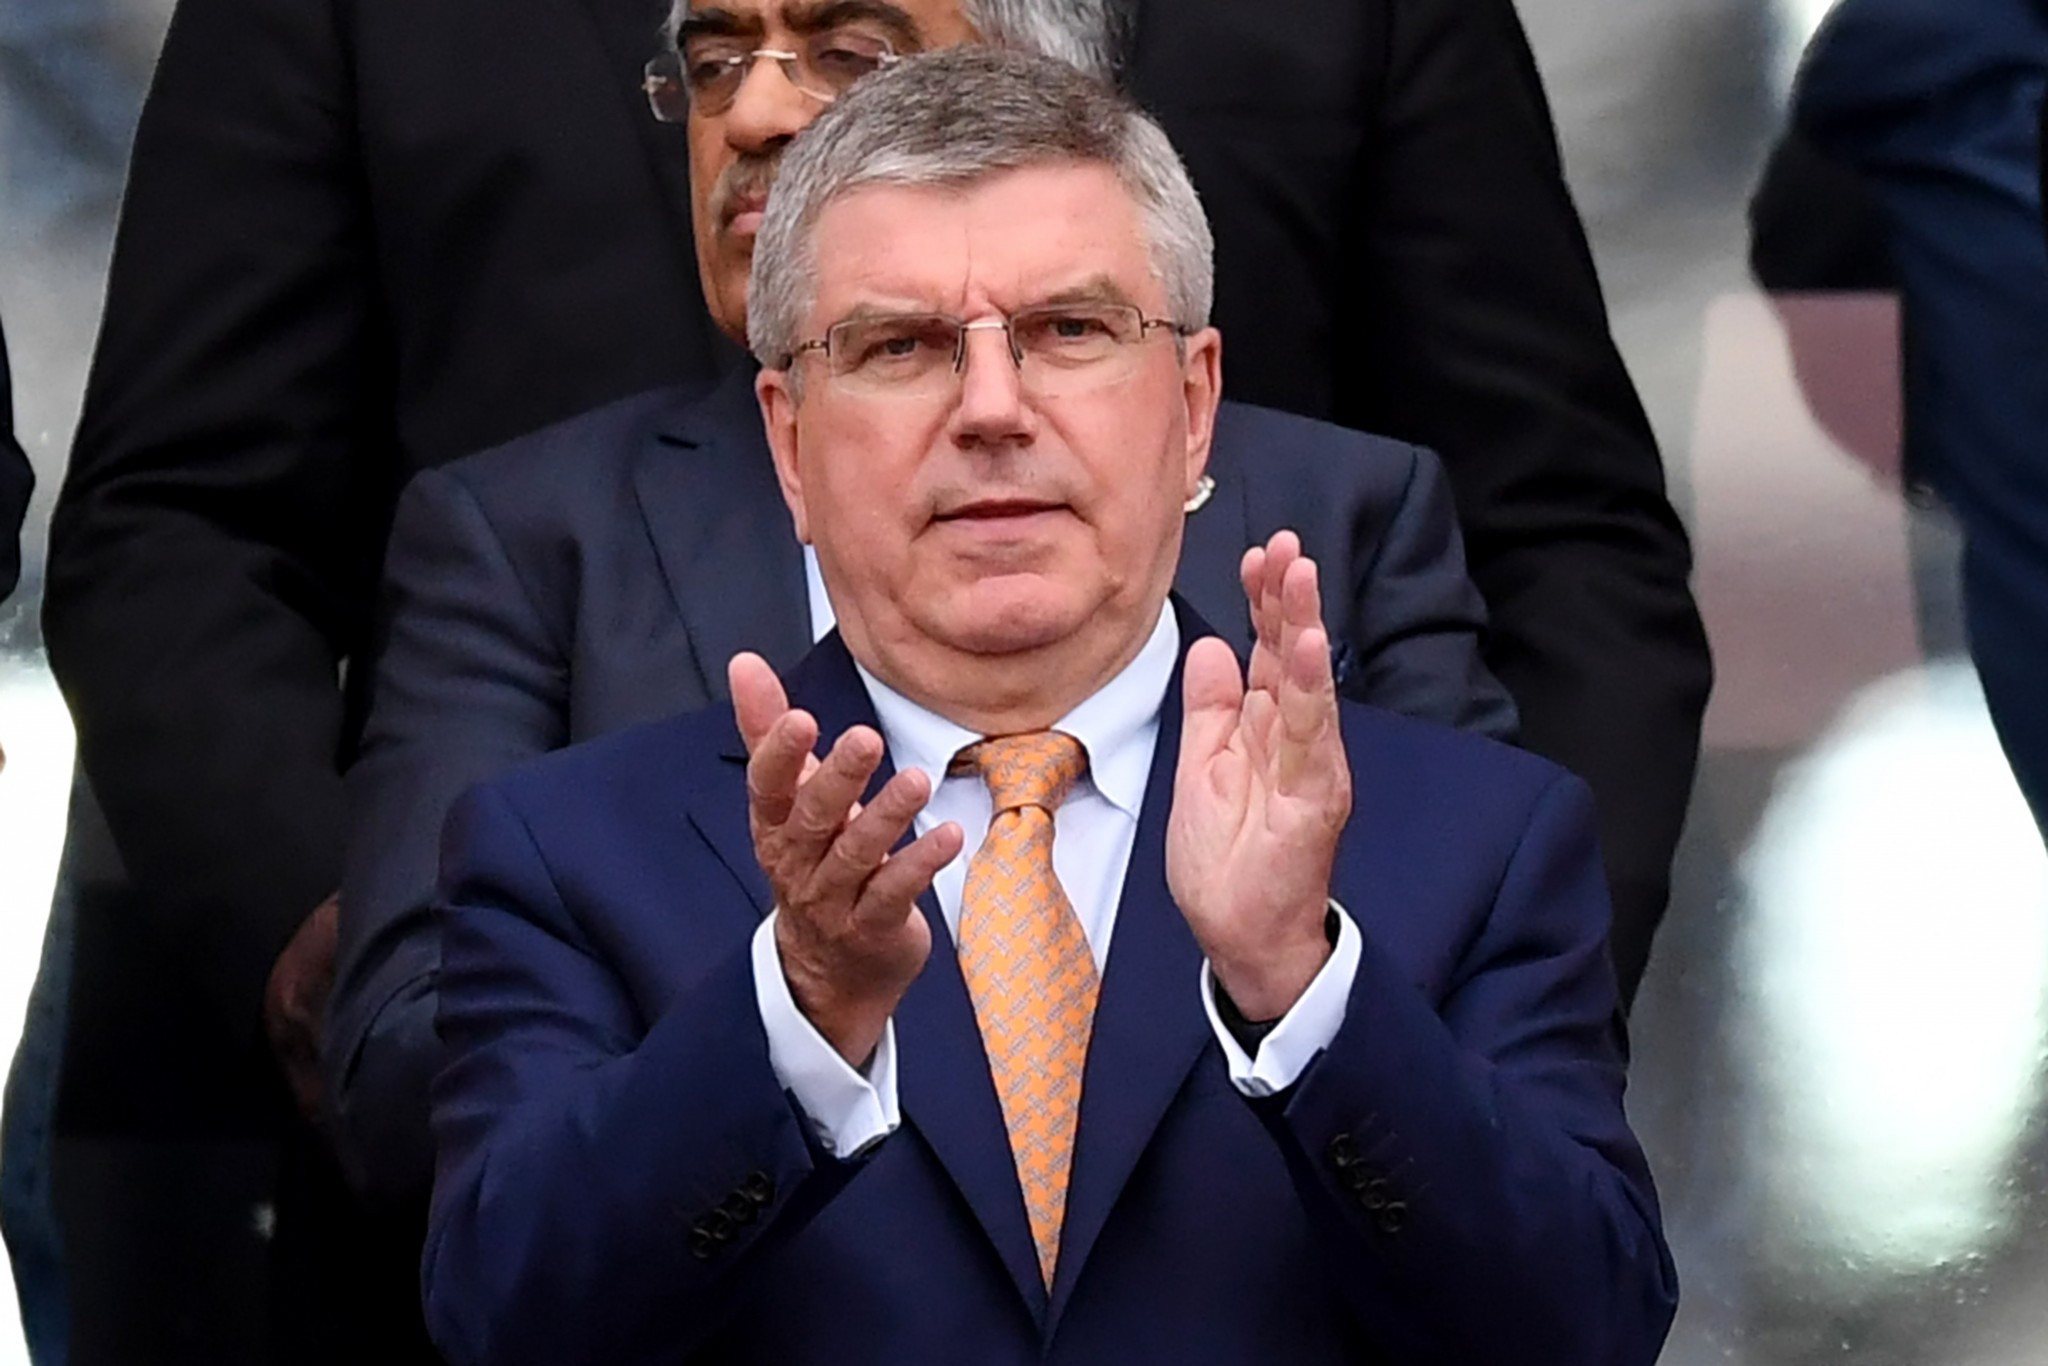 Thomas Bach has denied granting any concessions to Los Angeles following discussions with Eric Garcetti ©Getty Images